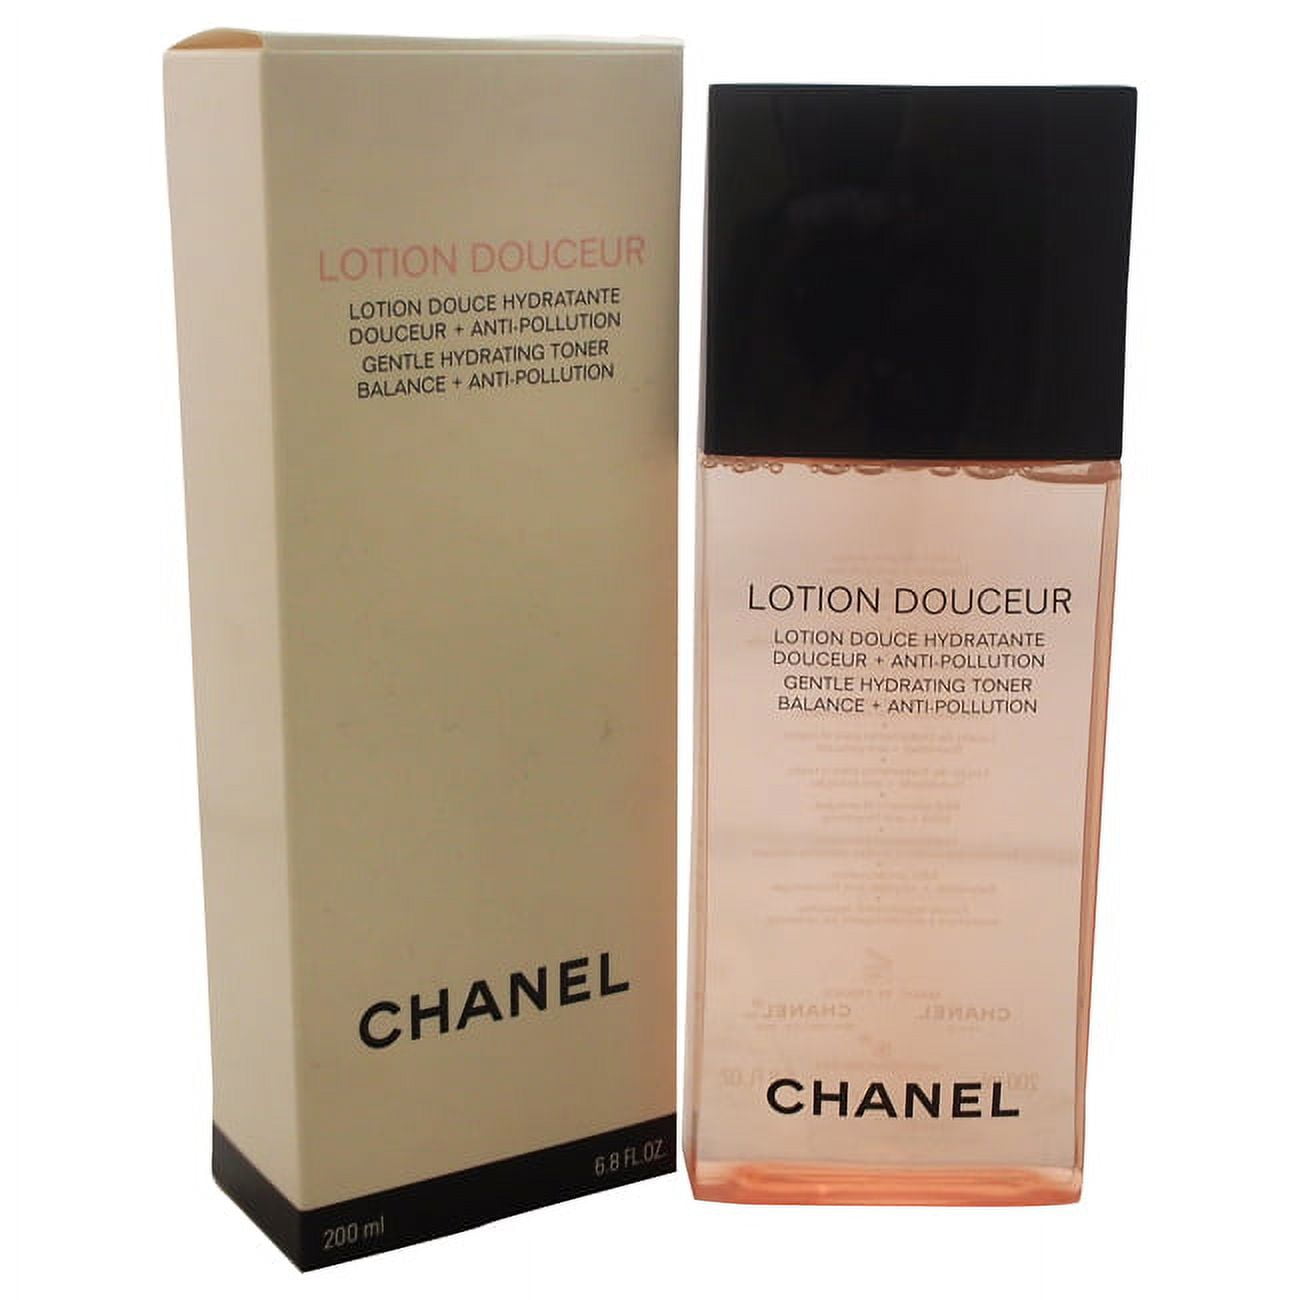 Lotion Douceur Gentle Hydrating Toner Balance + Anti-Pollution by Chanel  for Unisex - 6.8 oz Lotion